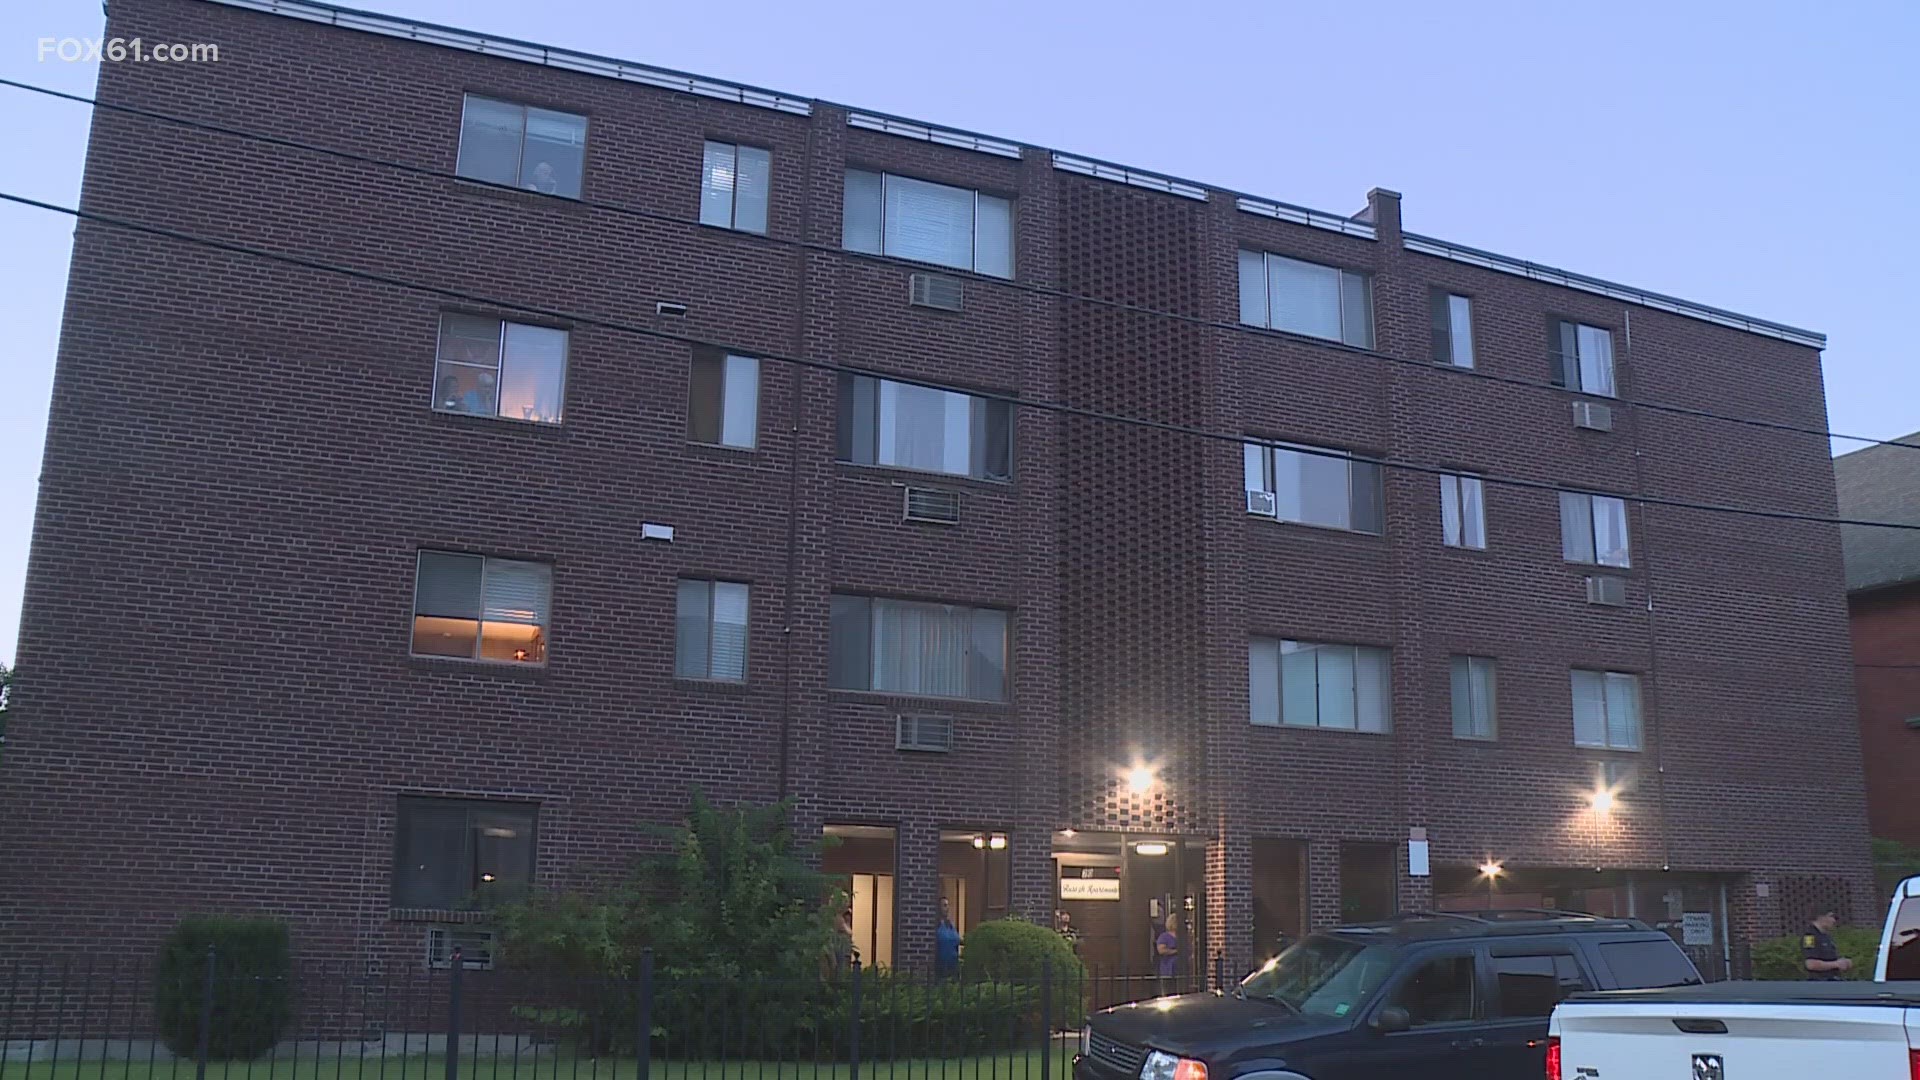 Police said that two people were found dead by gunshot wounds in a Russ Street apartment Monday evening.